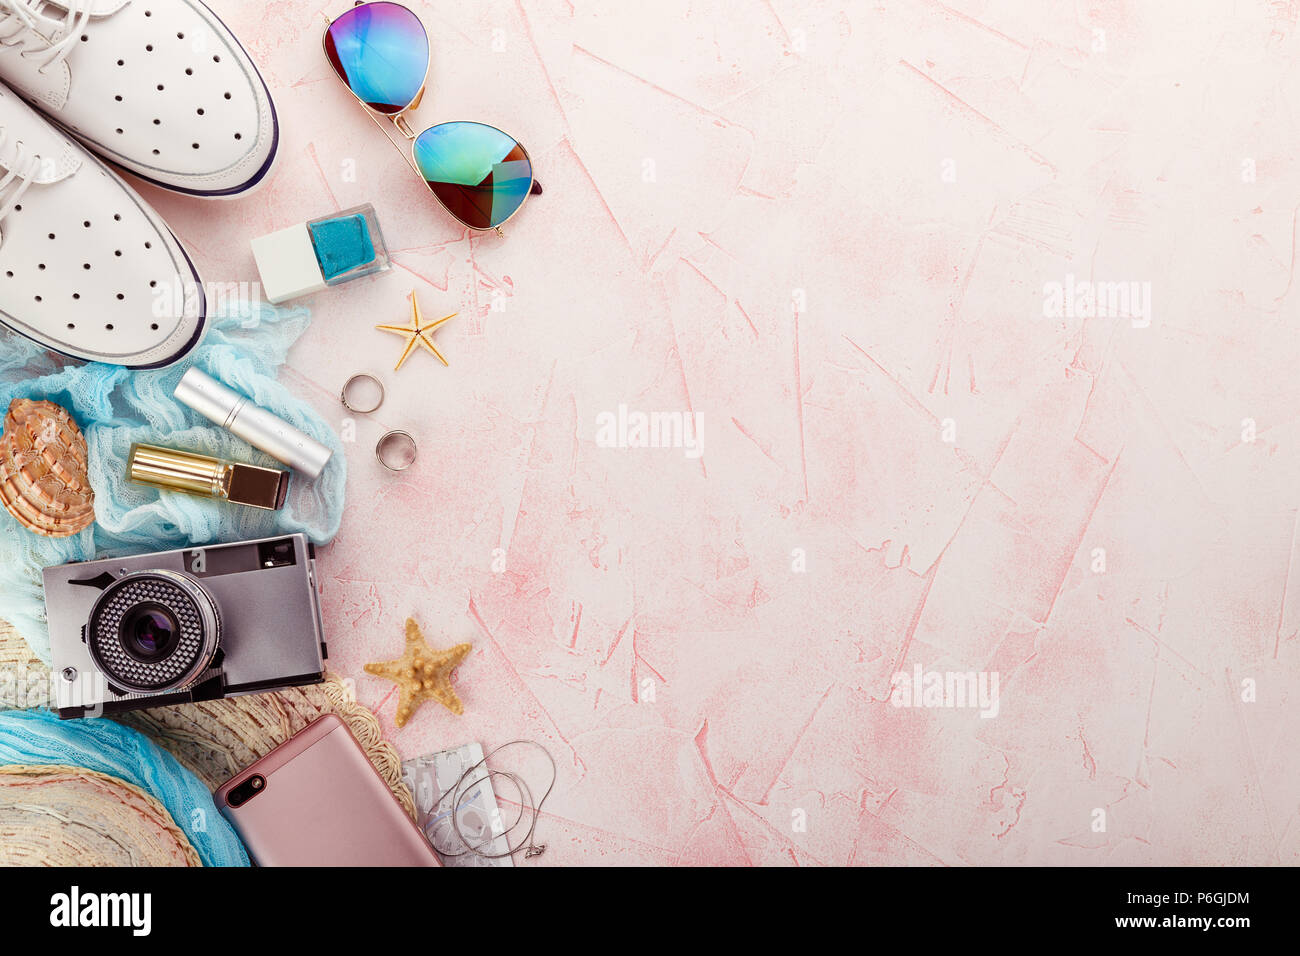 Outfit and accessories of traveler on pink background with copy space, Travel concept. Stock Photo